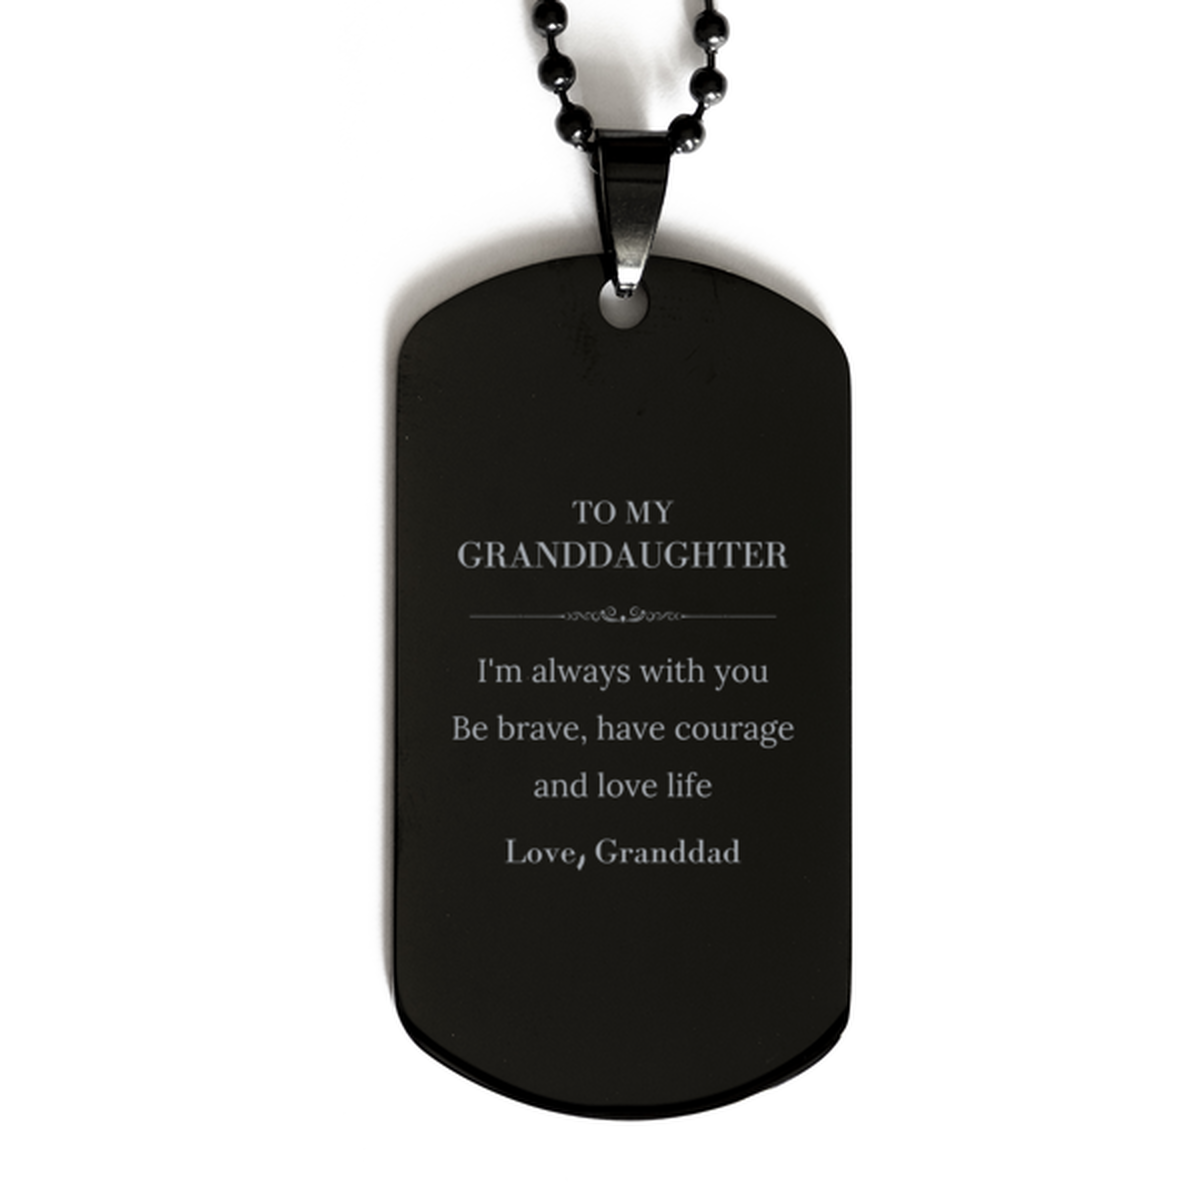 To My Granddaughter Gifts from Granddad, Unique Black Dog Tag Inspirational Christmas Birthday Graduation Gifts for Granddaughter I'm always with you. Be brave, have courage and love life. Love, Granddad